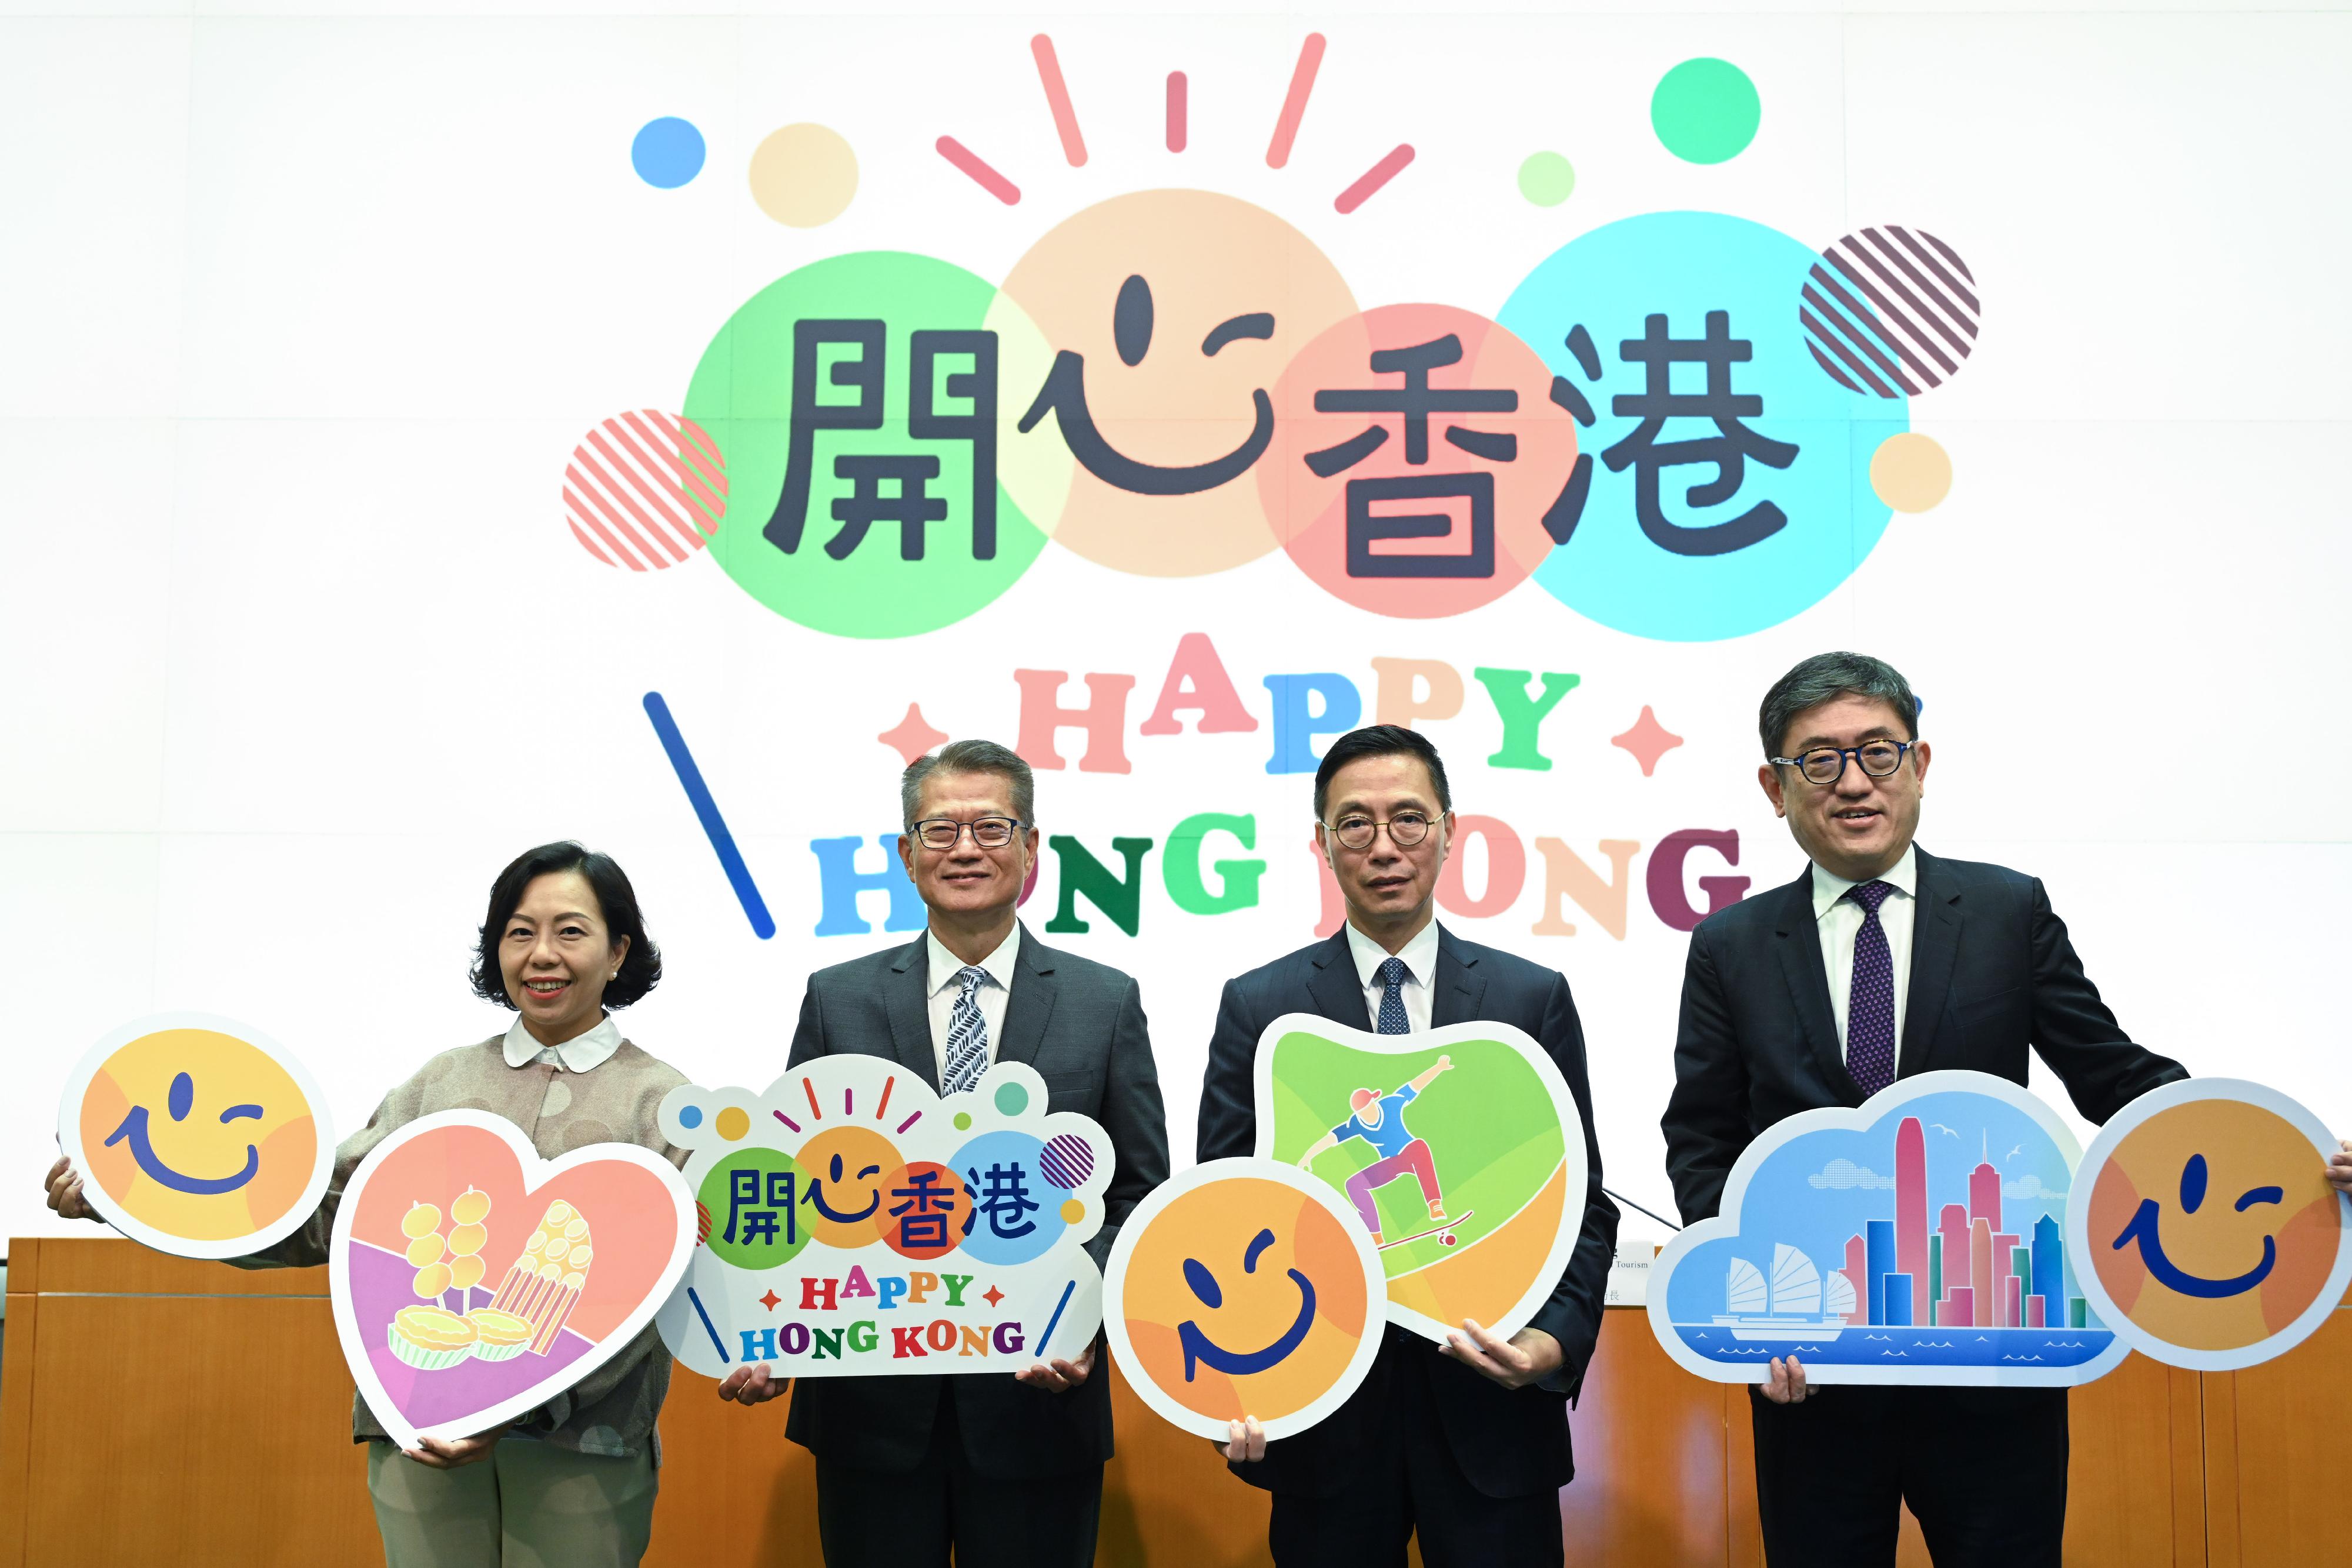 The Financial Secretary, Mr Paul Chan (second left), holds a press conference today (April 24) on the "Happy Hong Kong" Campaign at the Central Government Offices in Tamar. Also in attendance are the Secretary for Culture, Sports and Tourism, Mr Kevin Yeung (second right); the Secretary for Home and Youth Affairs, Miss Alice Mak (first left); and the Executive Director of the Hong Kong Tourism Board, Mr Dane Cheng (first right).